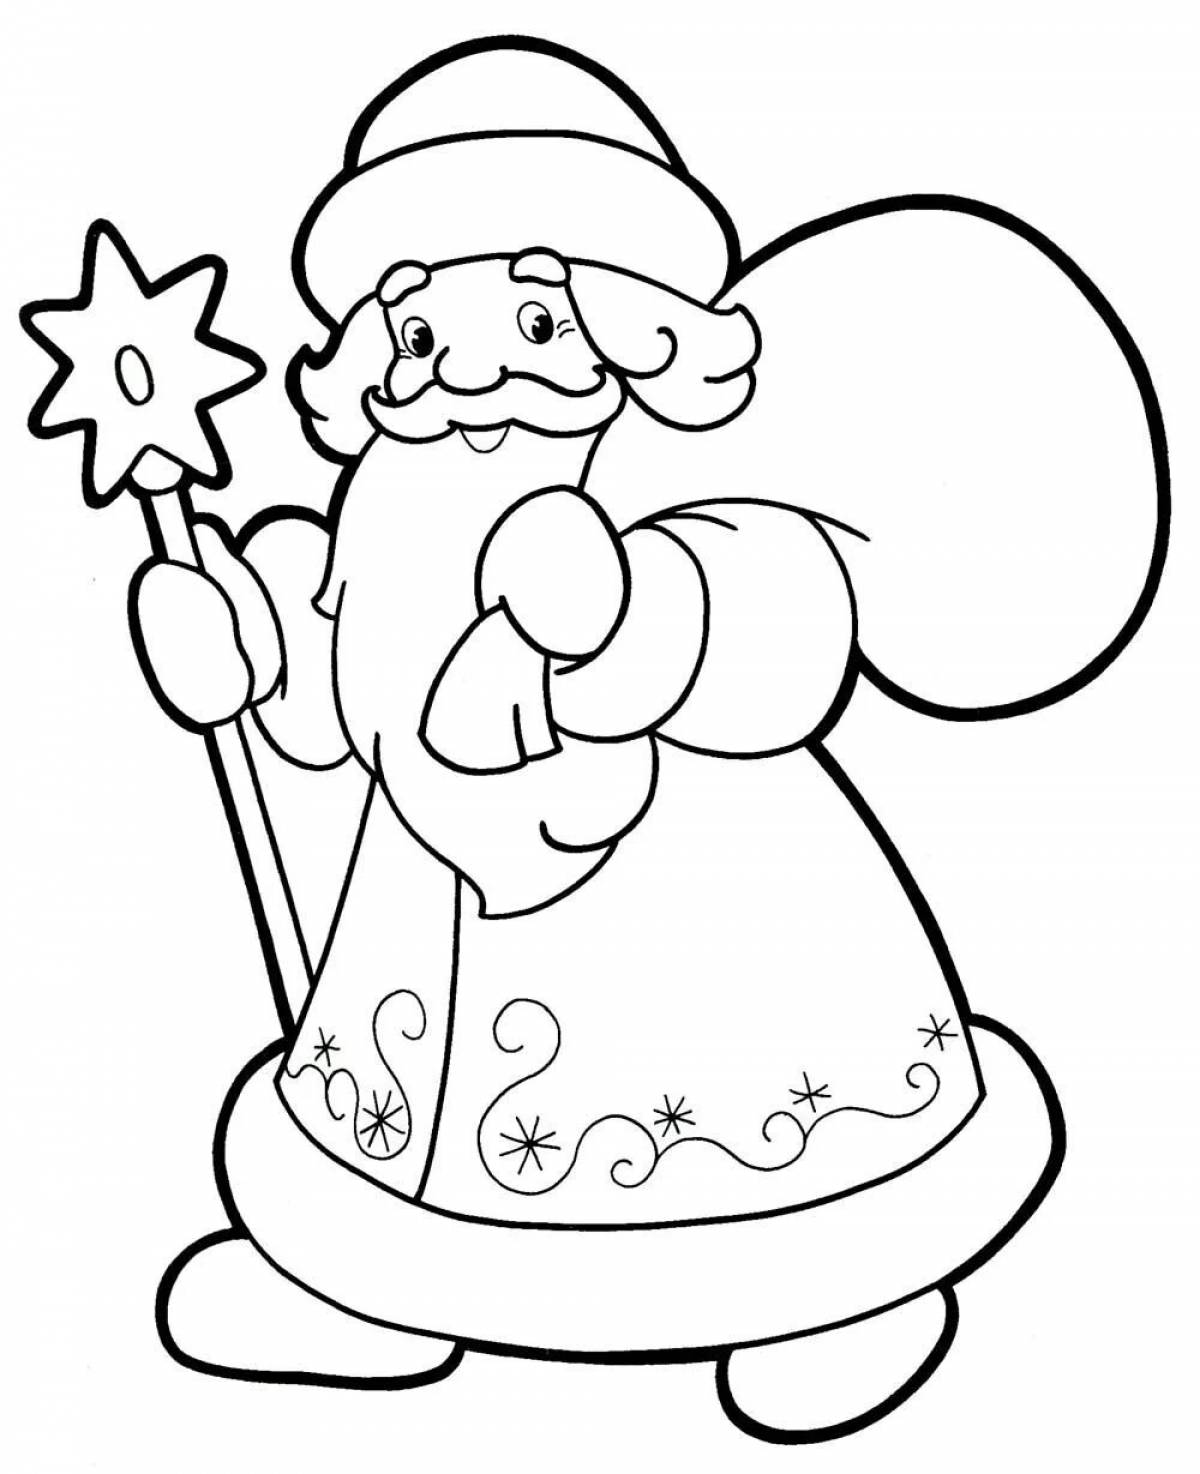 Coloring santa claus during the game